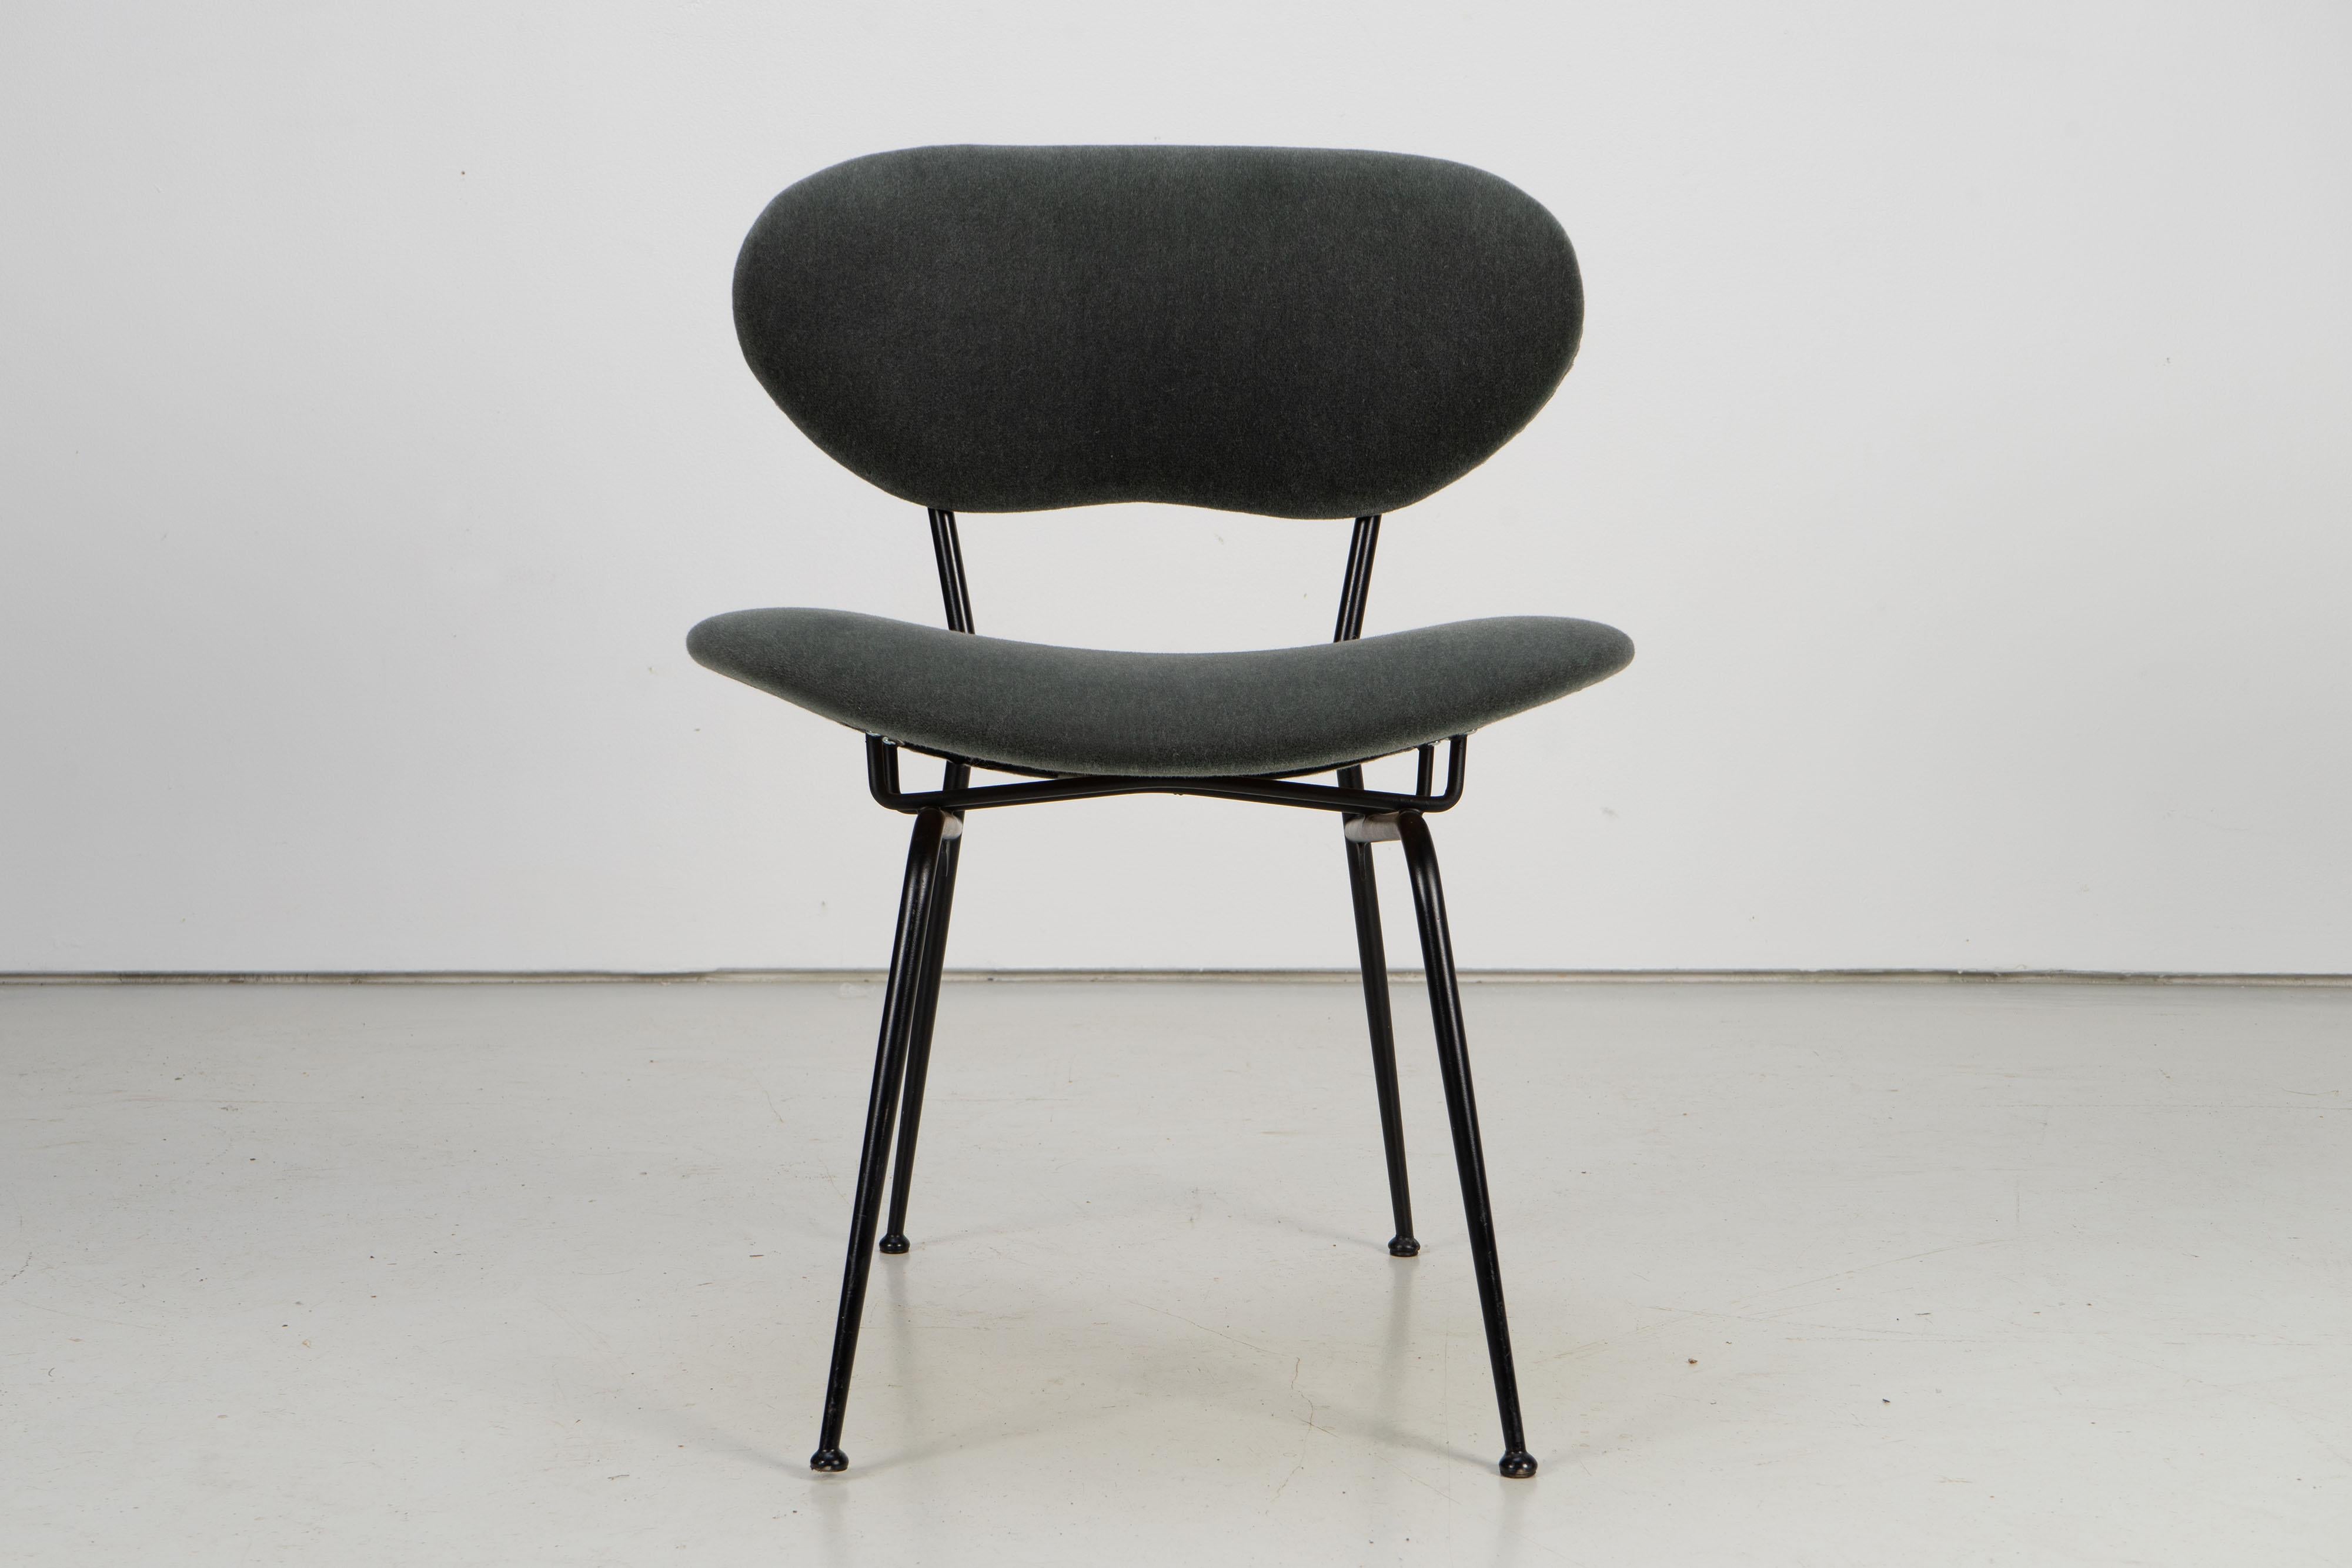 Steel Italian Modern Side Chairs with Mohair, 1960s For Sale